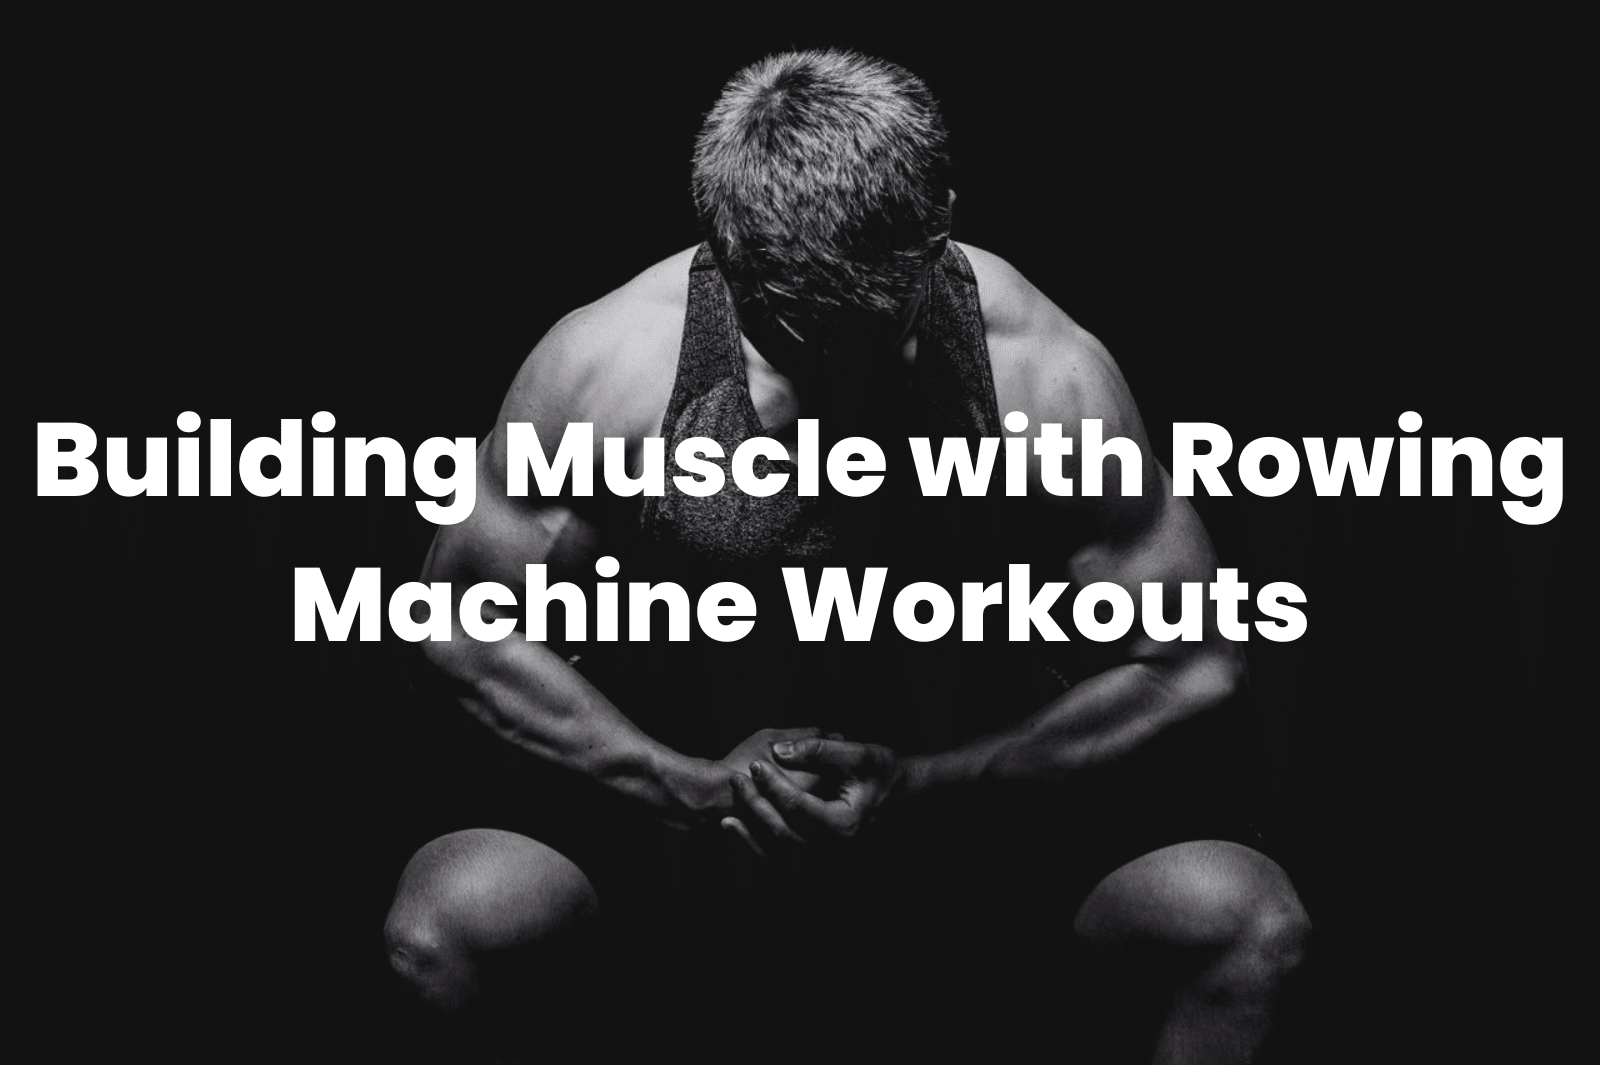 Building Muscle with Rowing Machine Workouts